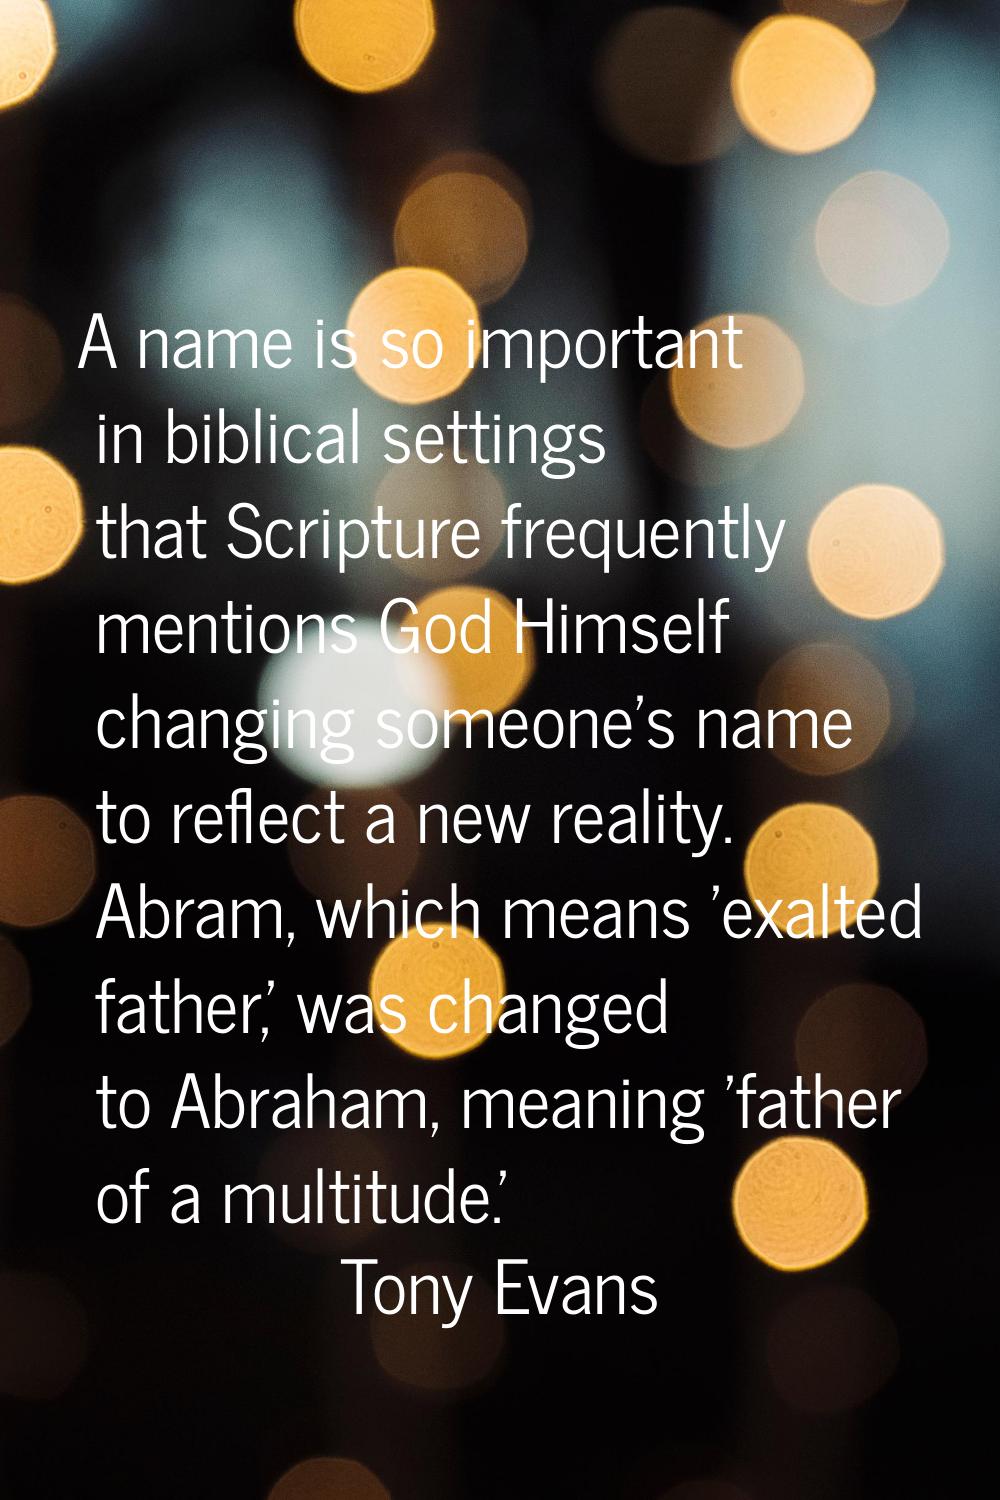 A name is so important in biblical settings that Scripture frequently mentions God Himself changing